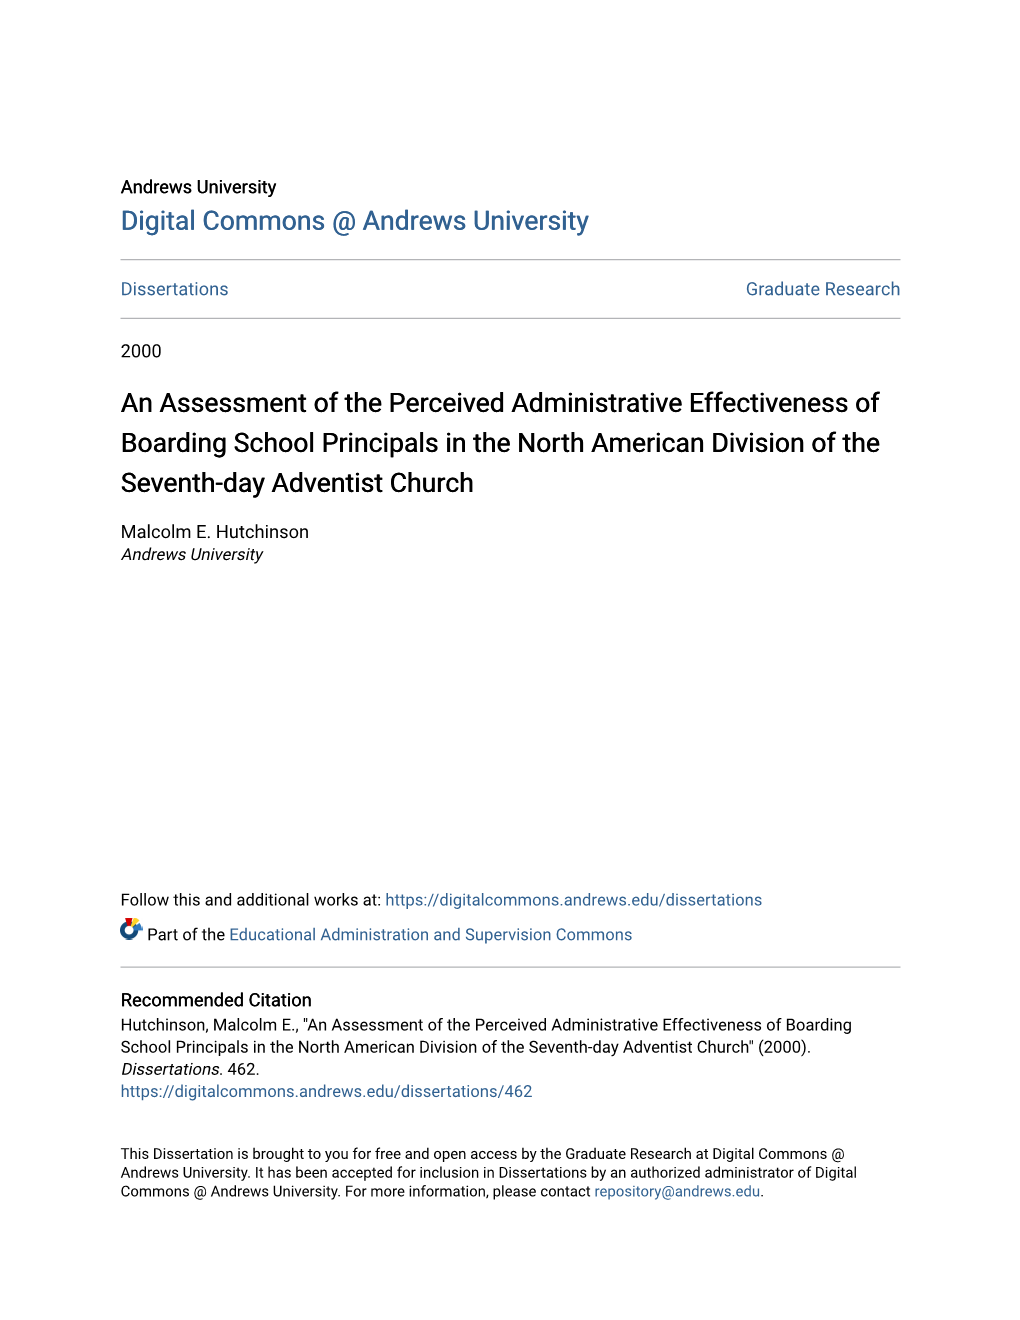 An Assessment of the Perceived Administrative Effectiveness of Boarding School Principals in the North American Division of the Seventh-Day Adventist Church